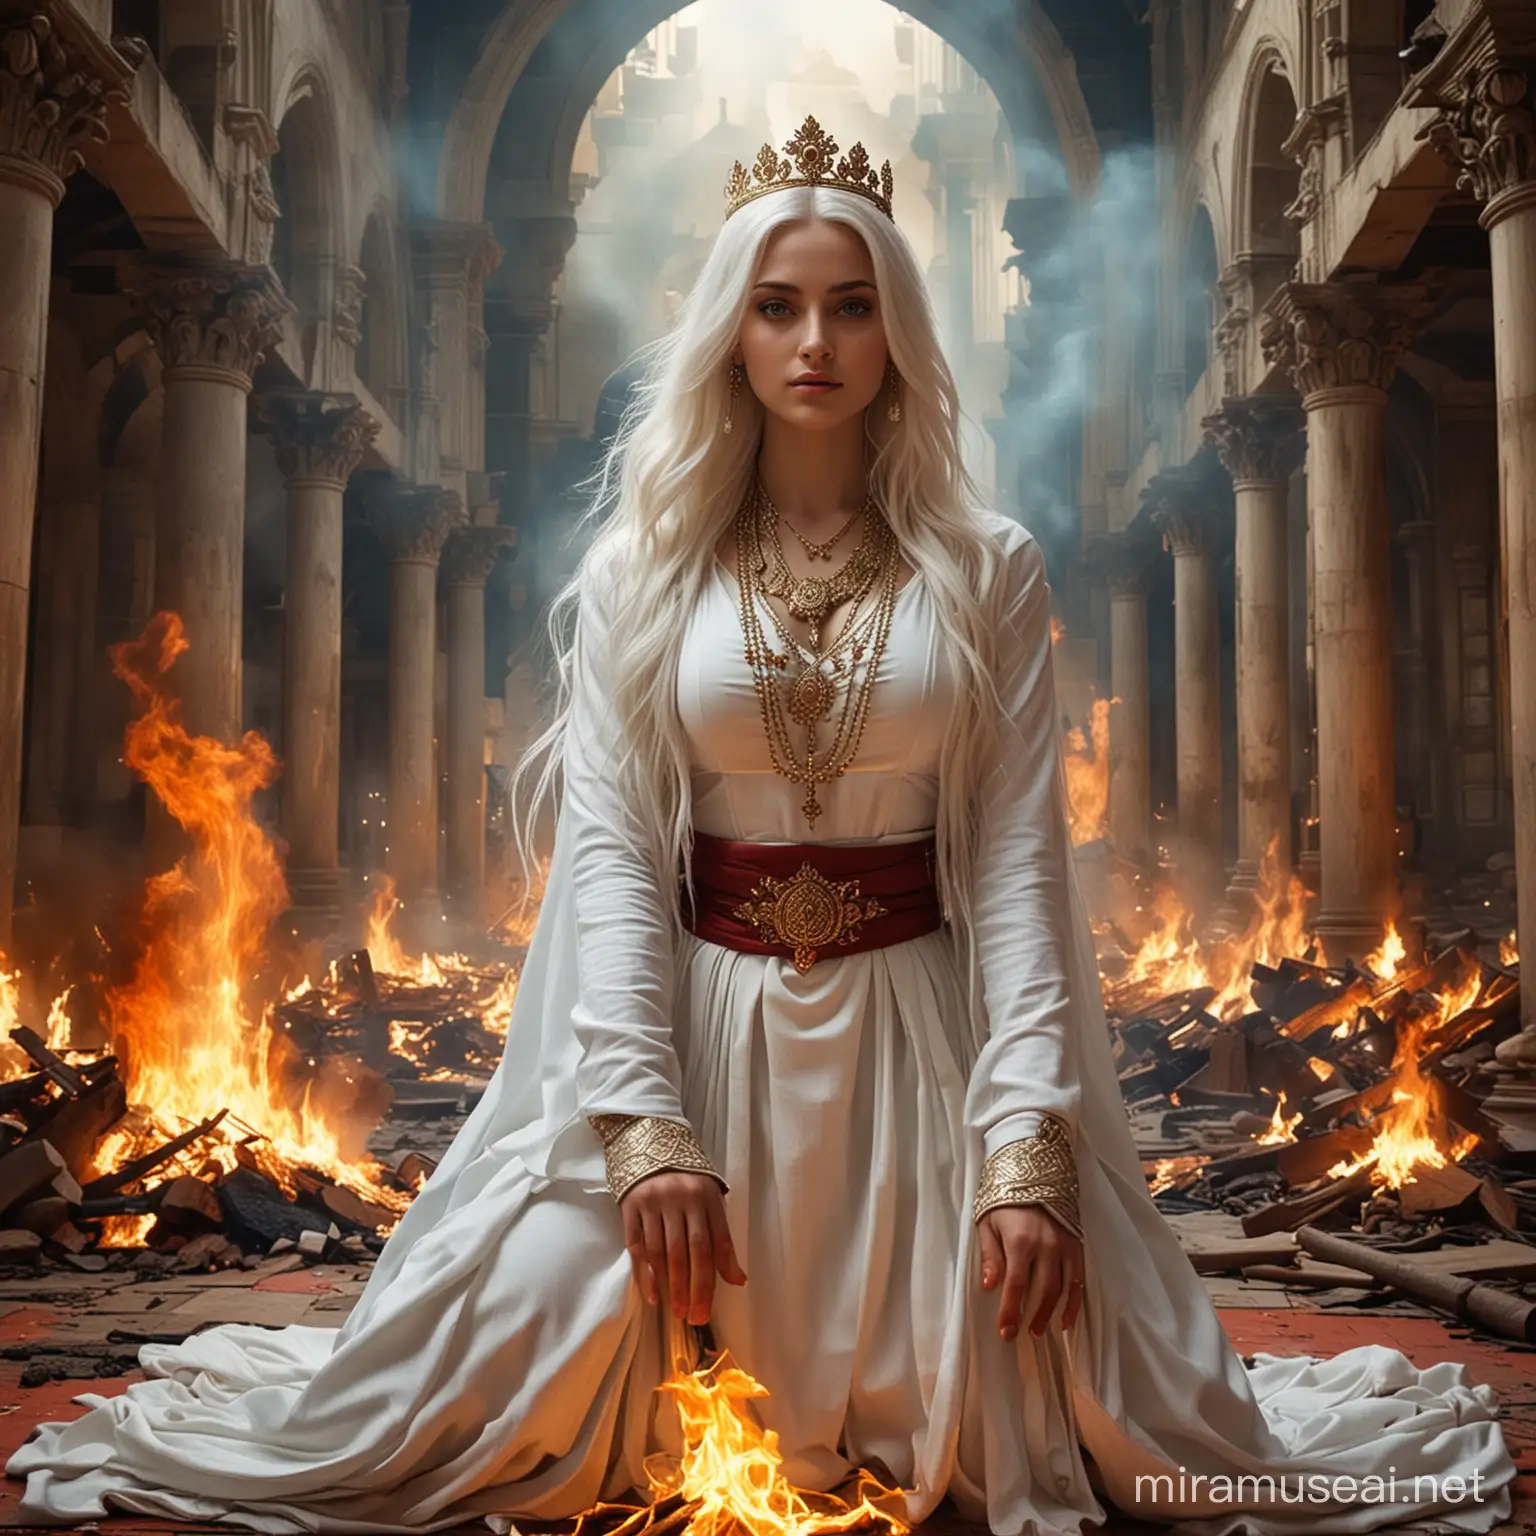 Powerful Empresses Fiery Confrontation in Divine Realms